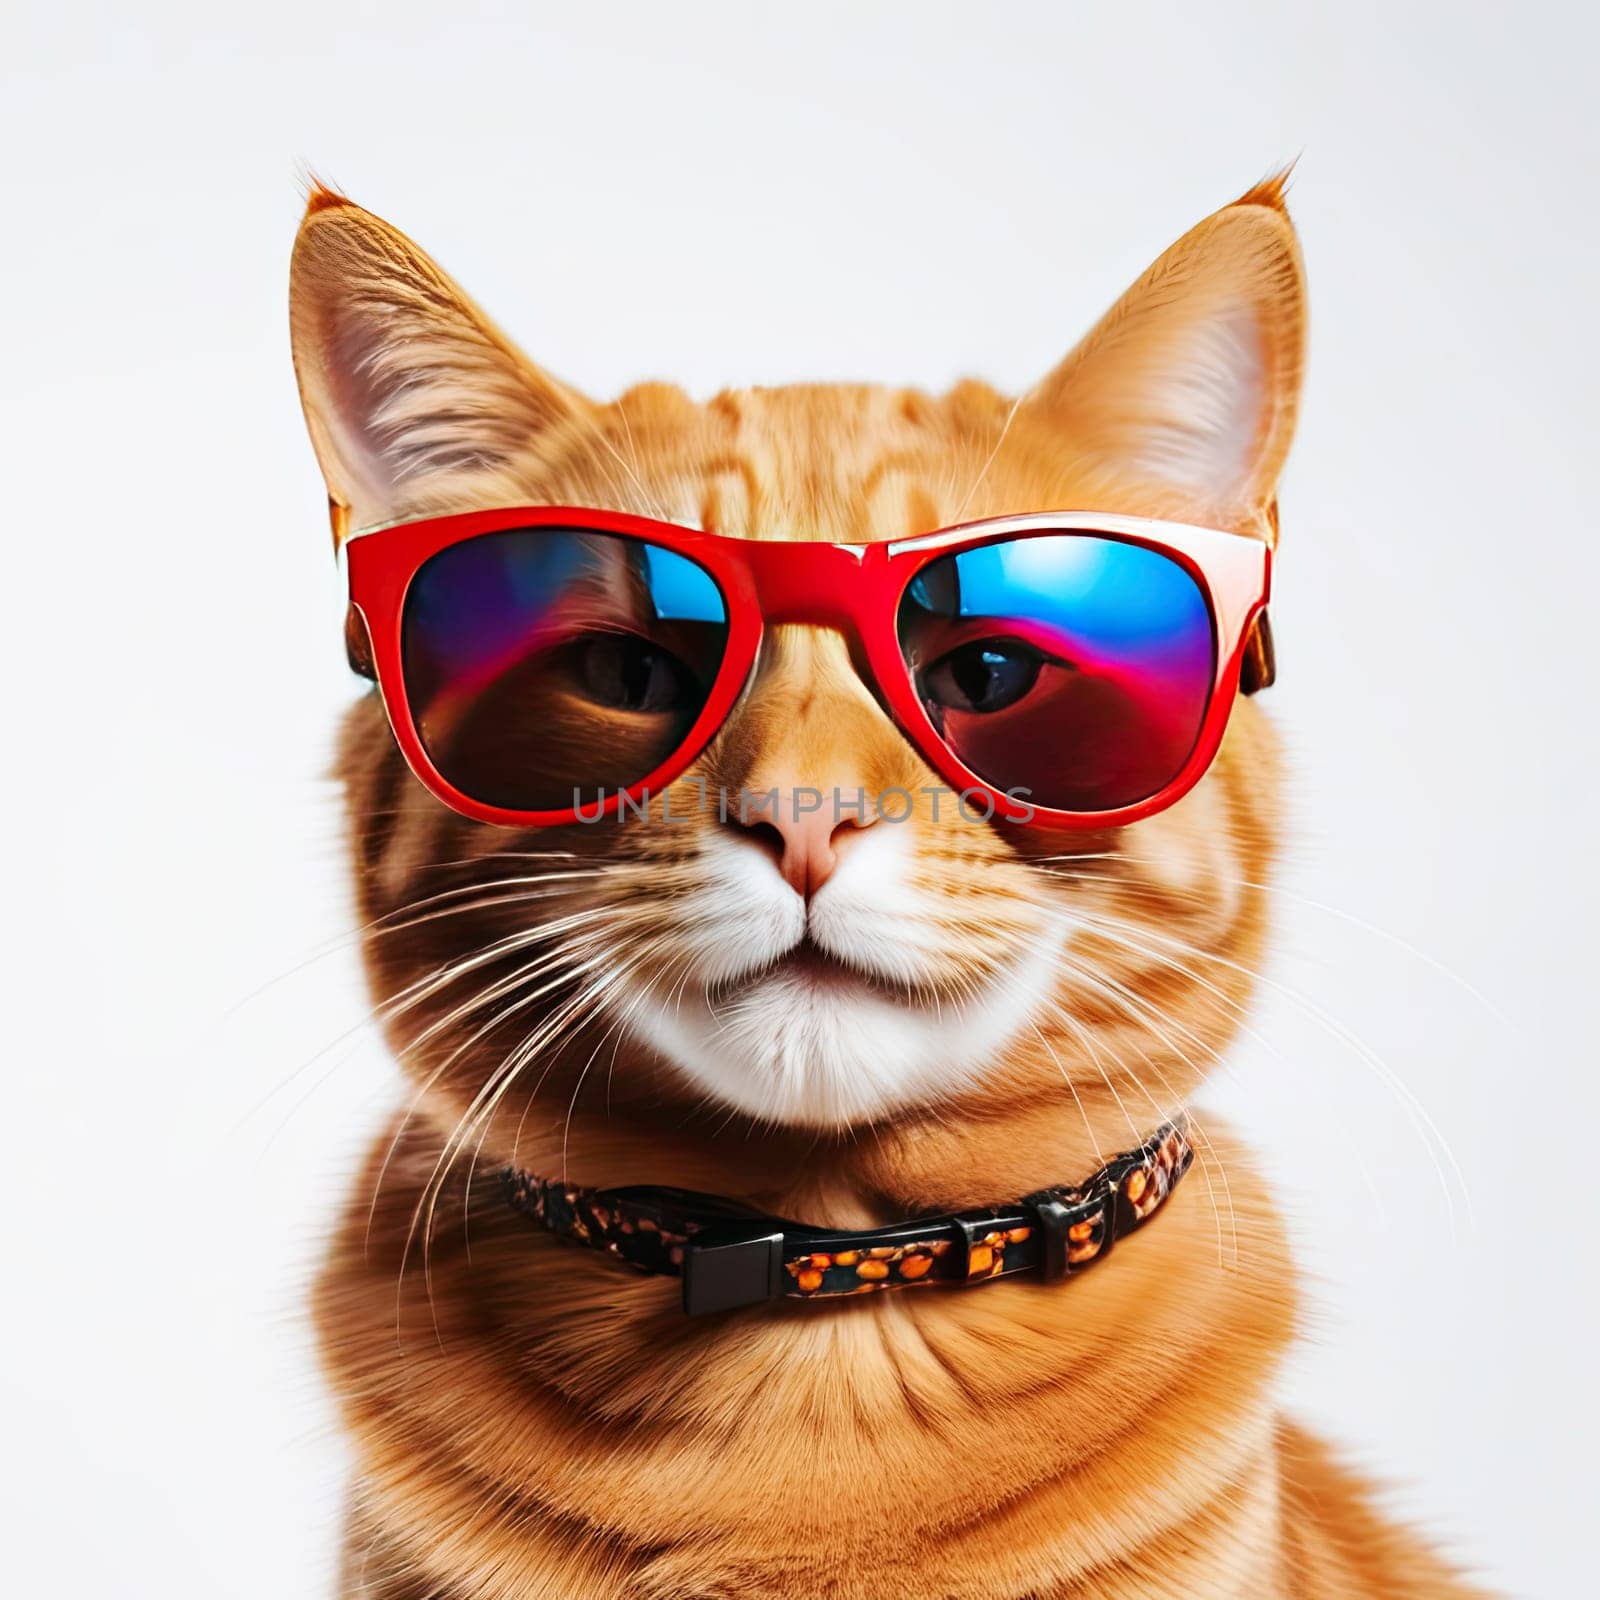 Close up portrait of funny red cat wearing sunglasses 